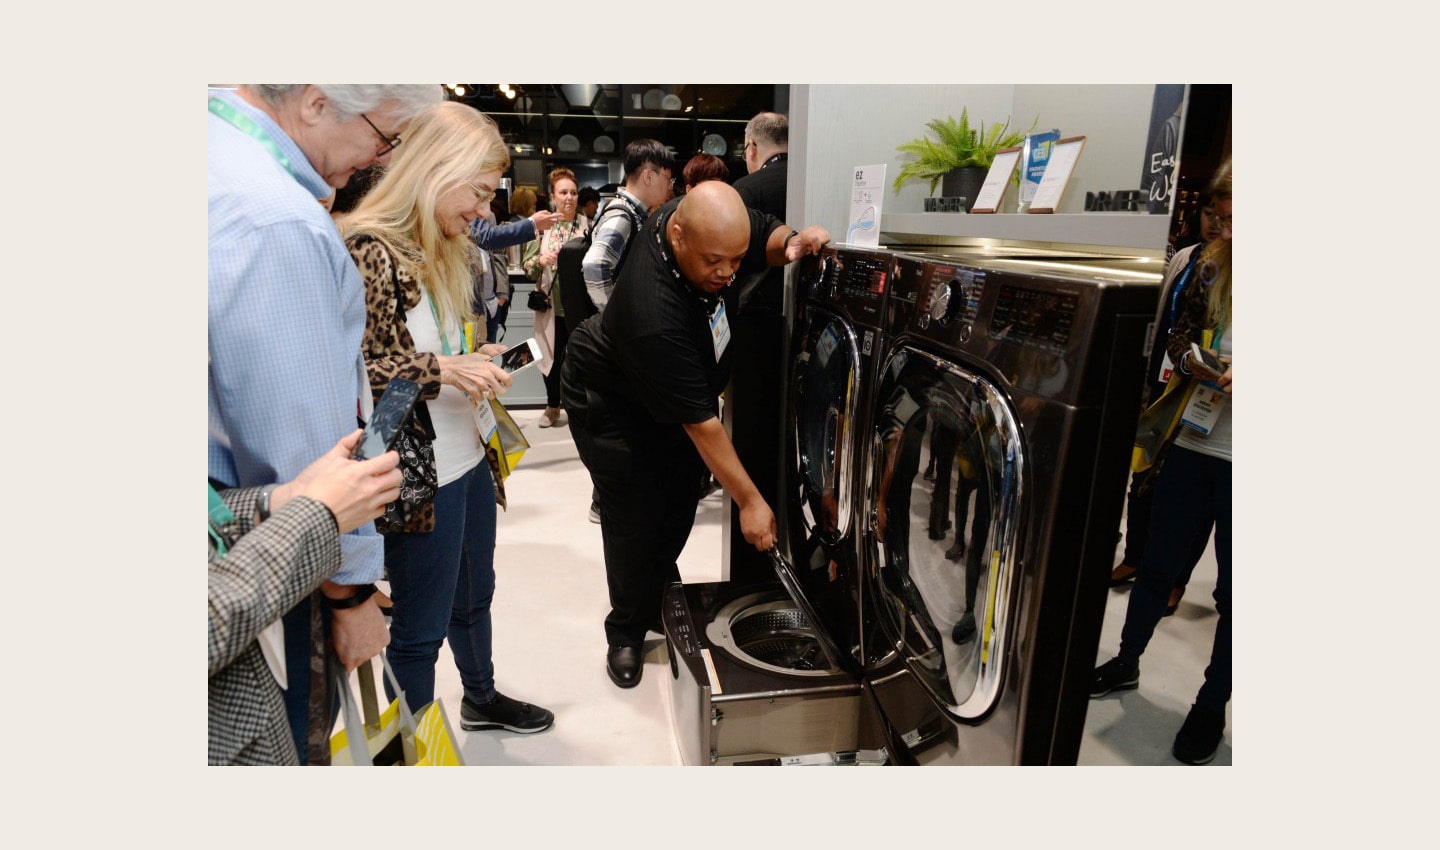 An LG representative demonstrates the second drum of an LG TwinWash appliance to onlookers at CES 2020